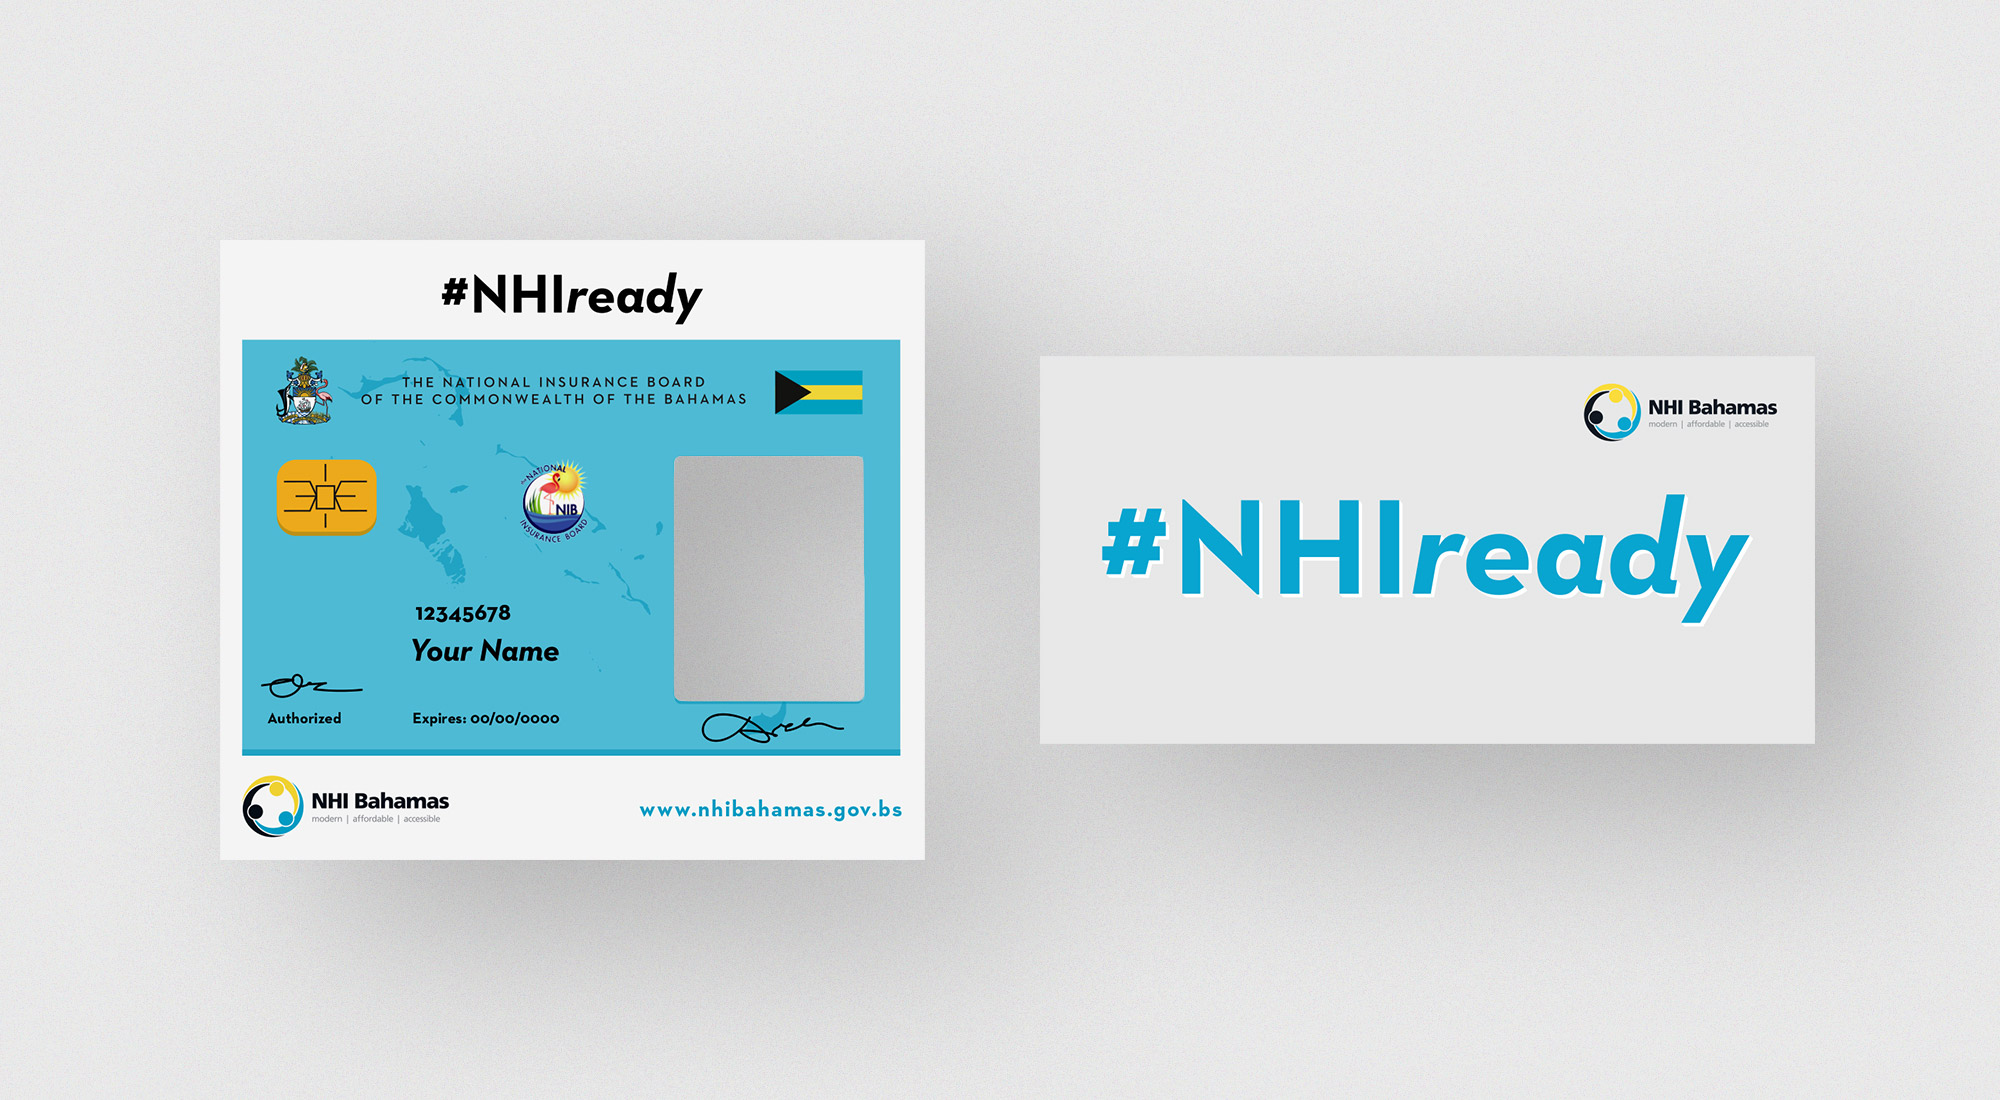 Are You NHI Ready Print Ad Campaign